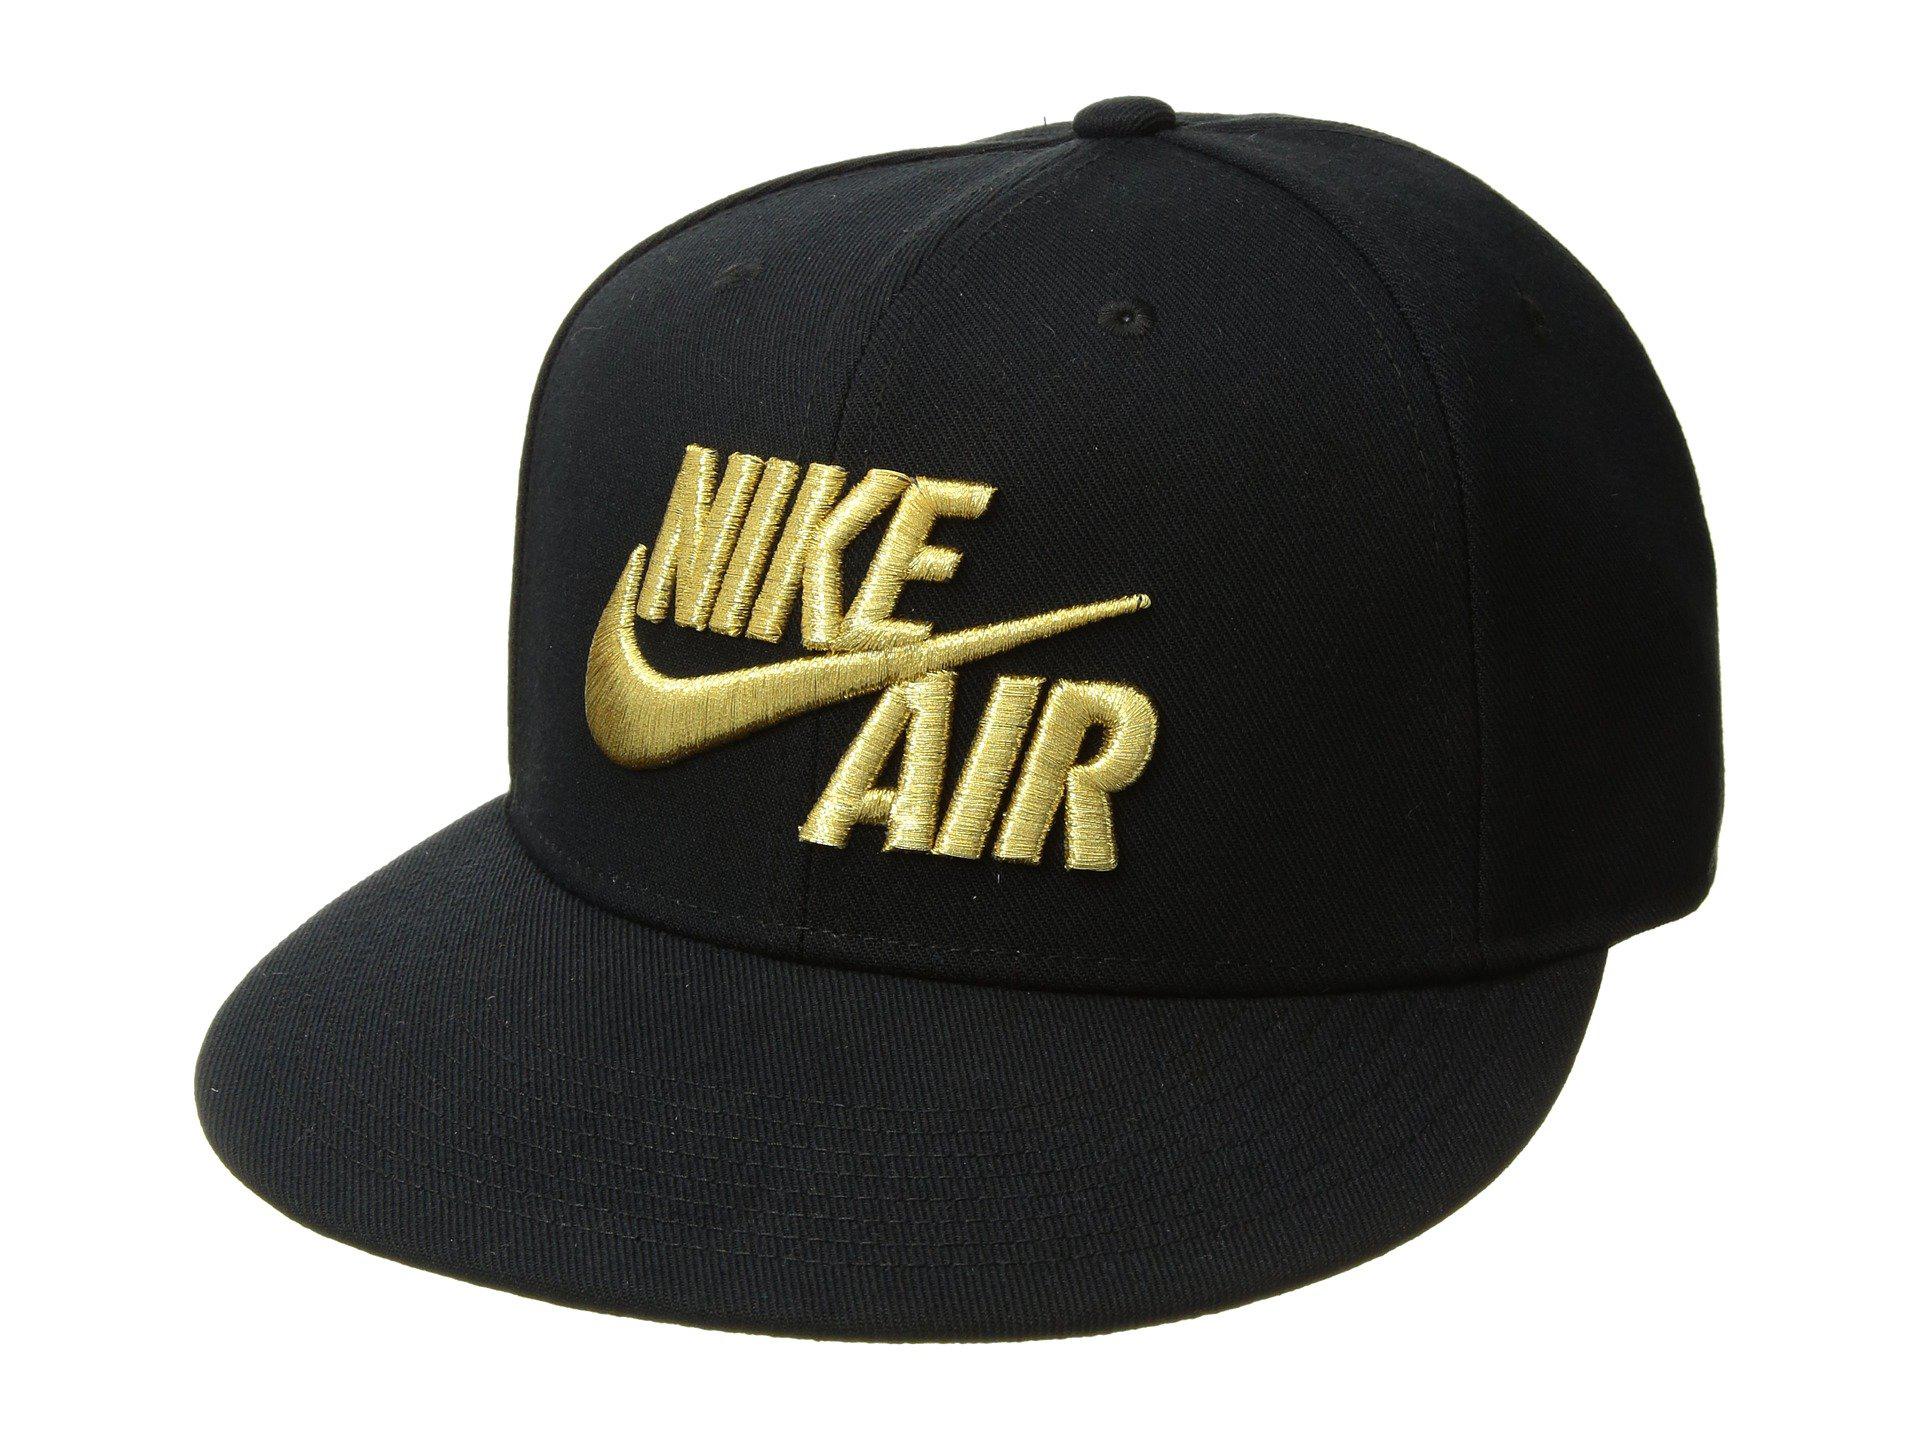 black and gold nike hat